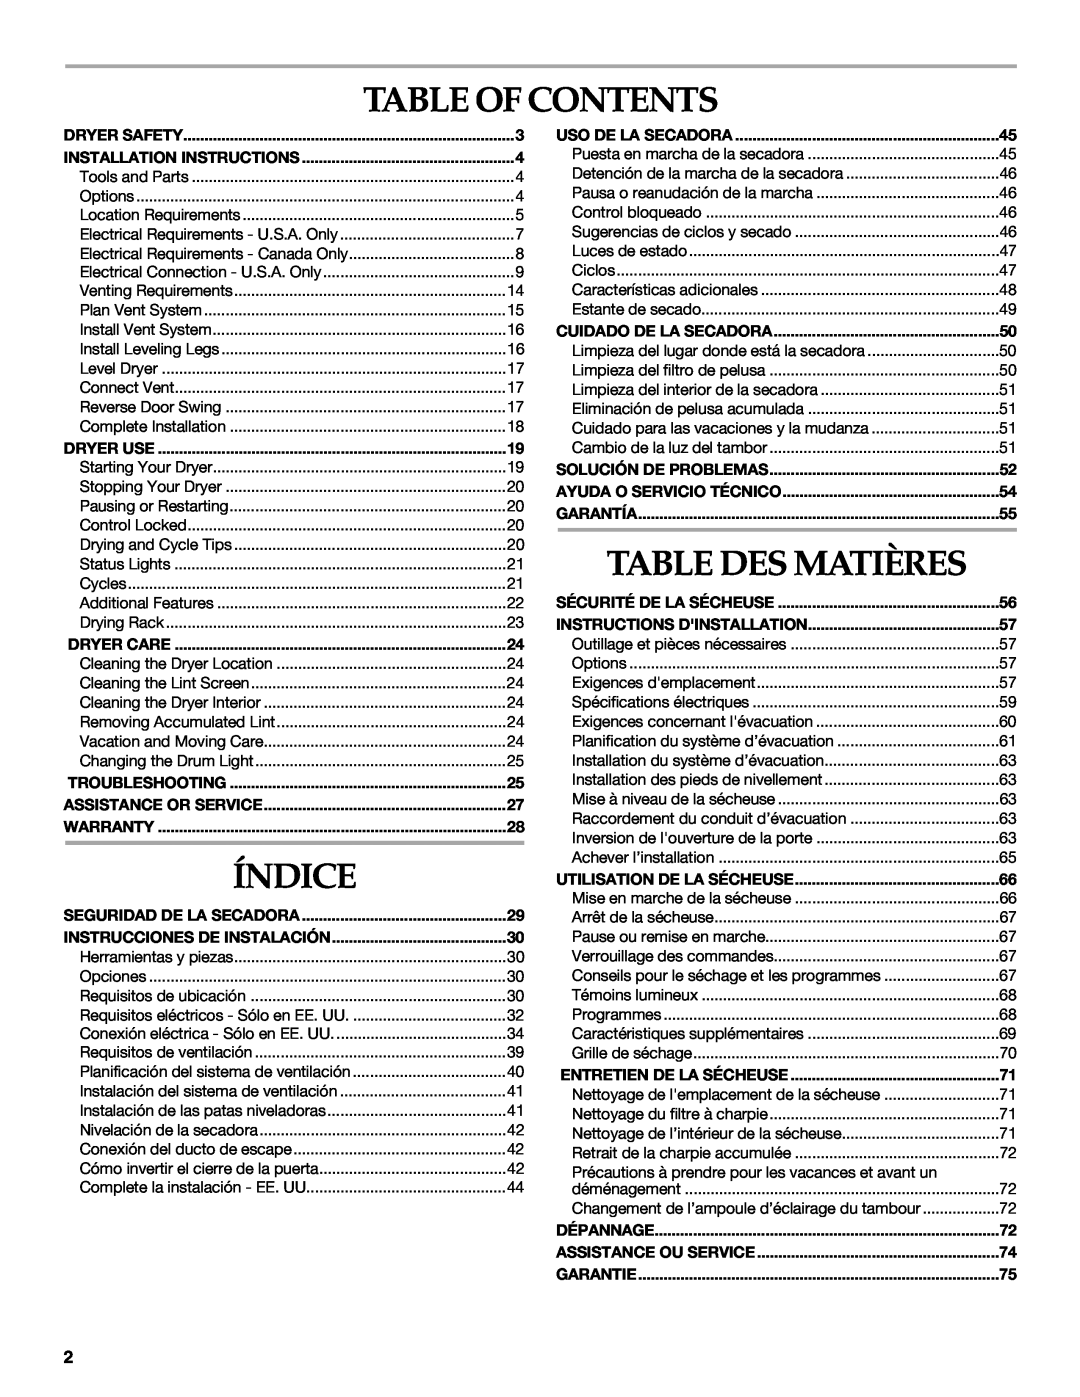 Maytag W10099070 manual Table Of Contents, Índice, Table Des Matières, Dryer Safety, Installation Instructions, Dryer Use 